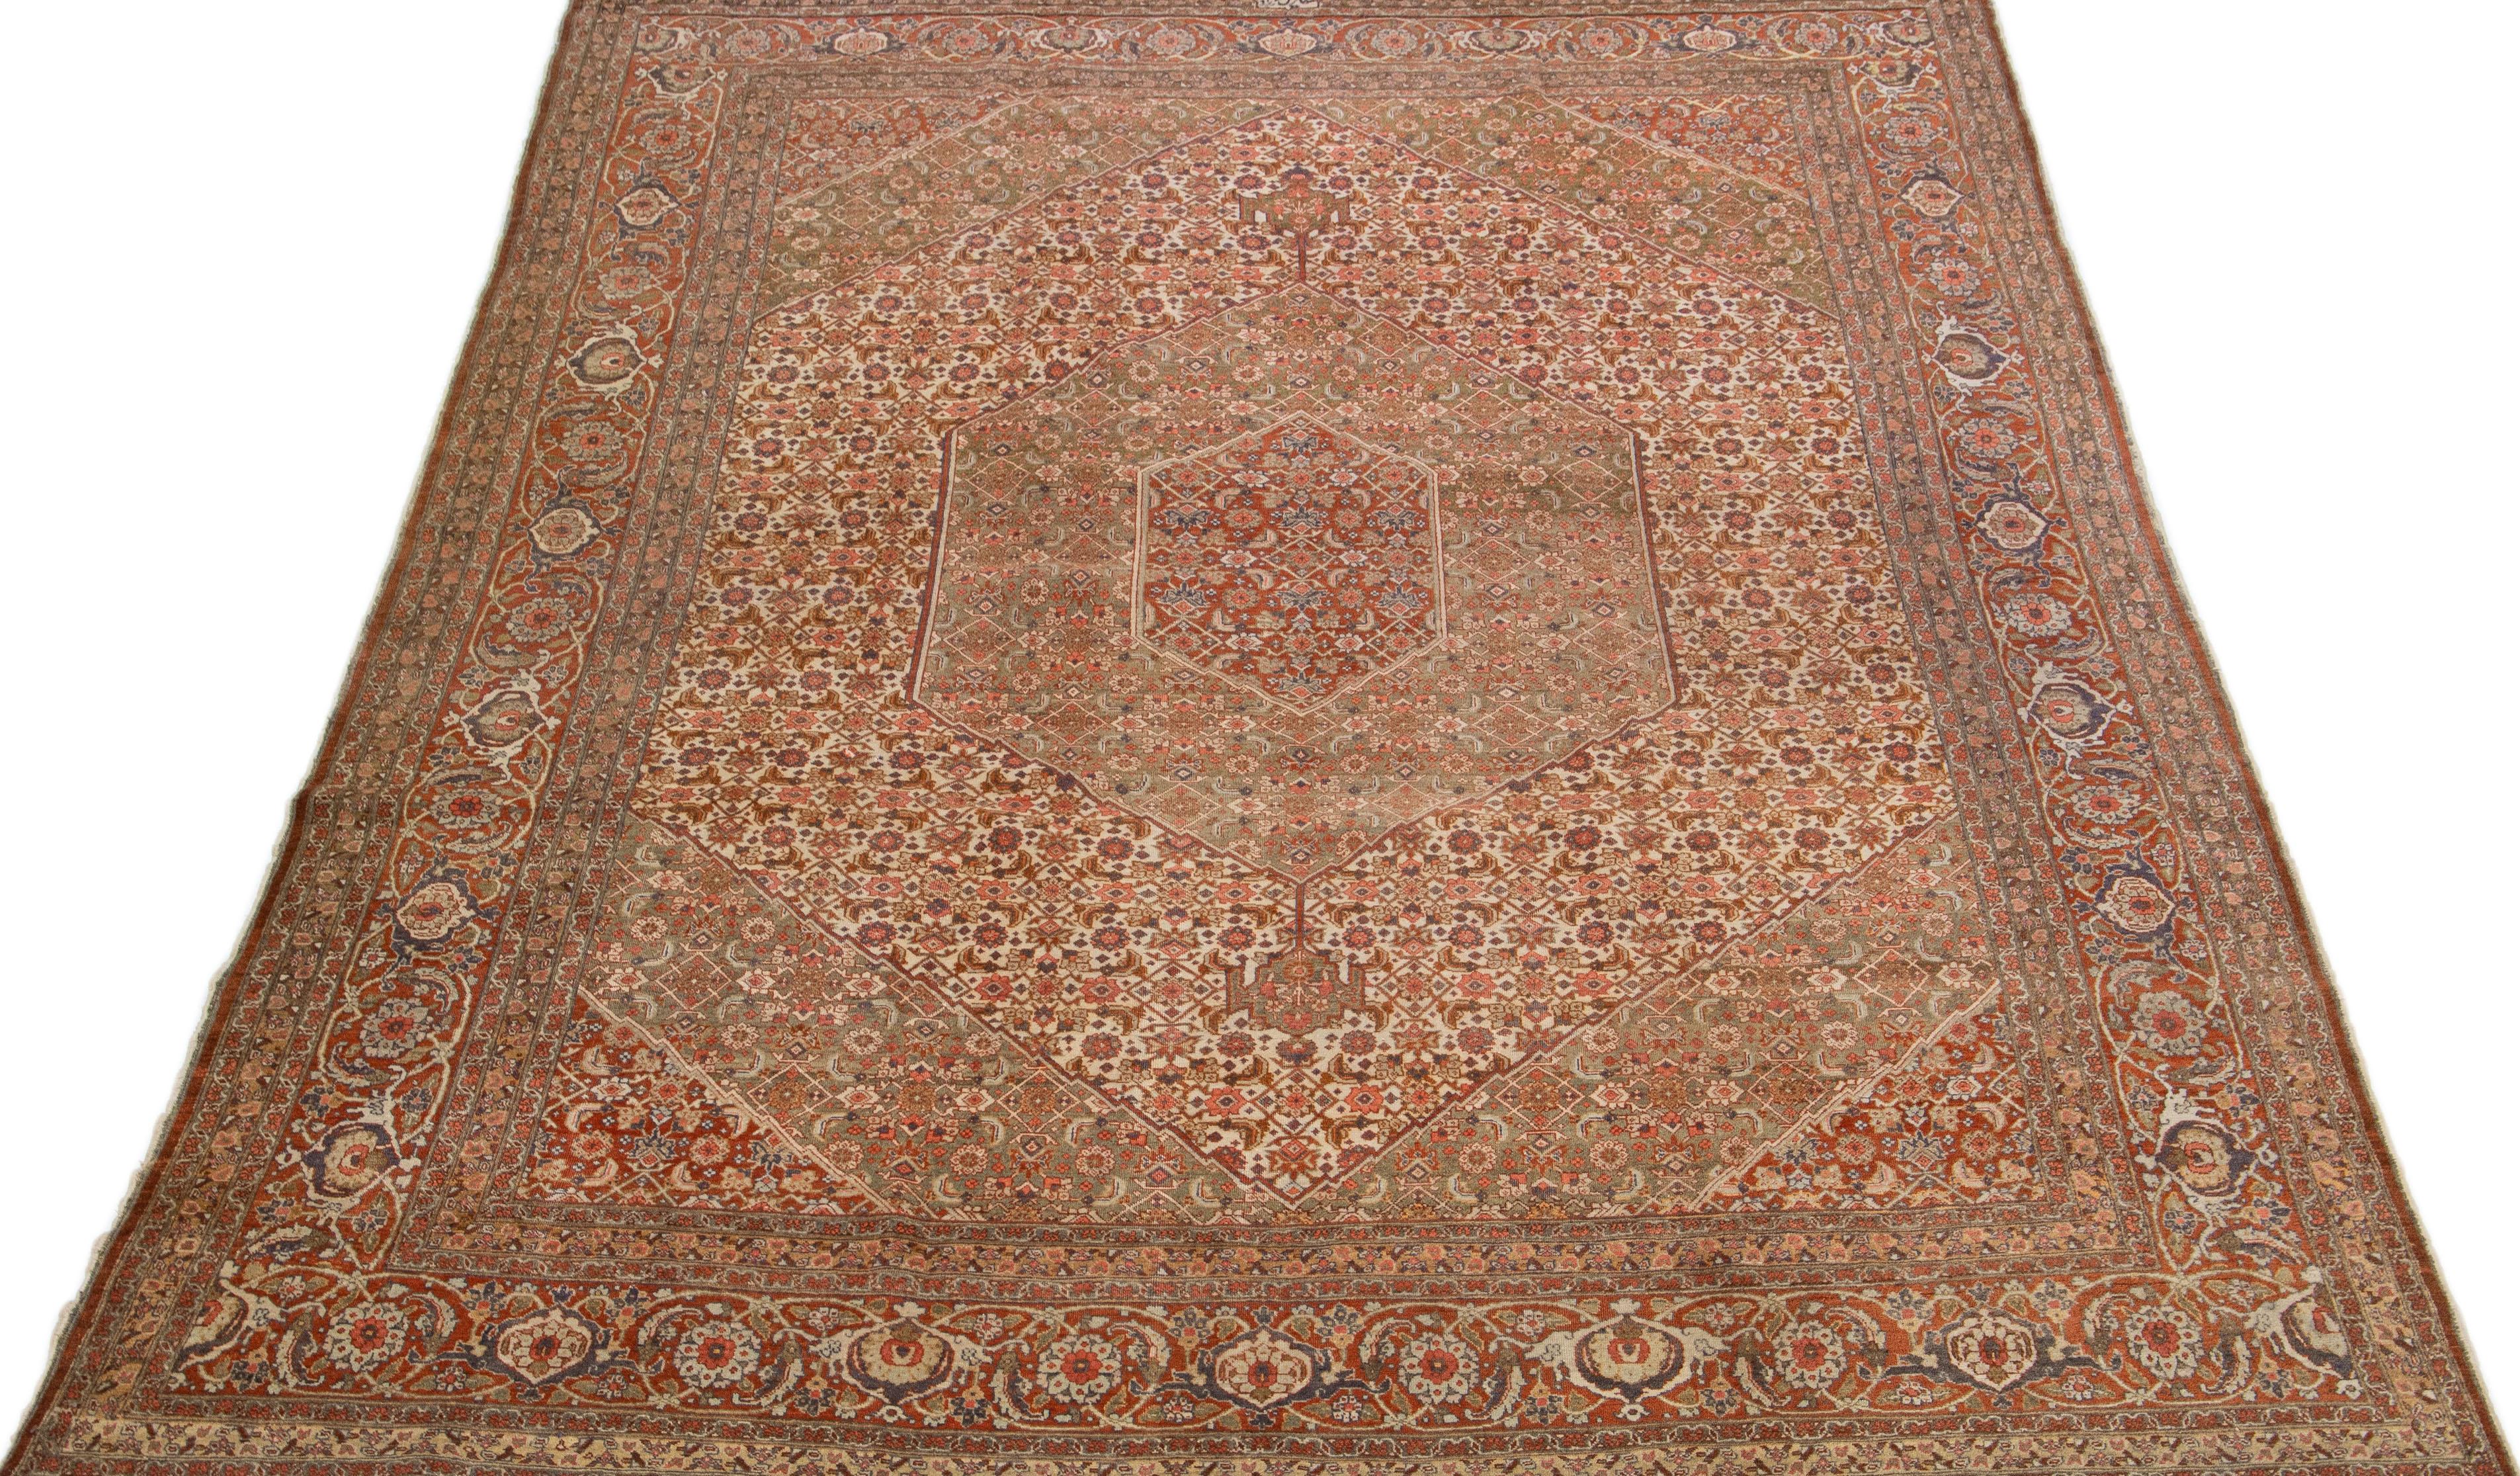 Beautiful antique Persian distressed hand-knotted wool rug with a beige and green color field. This piece has a rusted frame with peach, blue, and brown accents in a gorgeous all-over medallion floral design.

This rug measures: 9'4' x